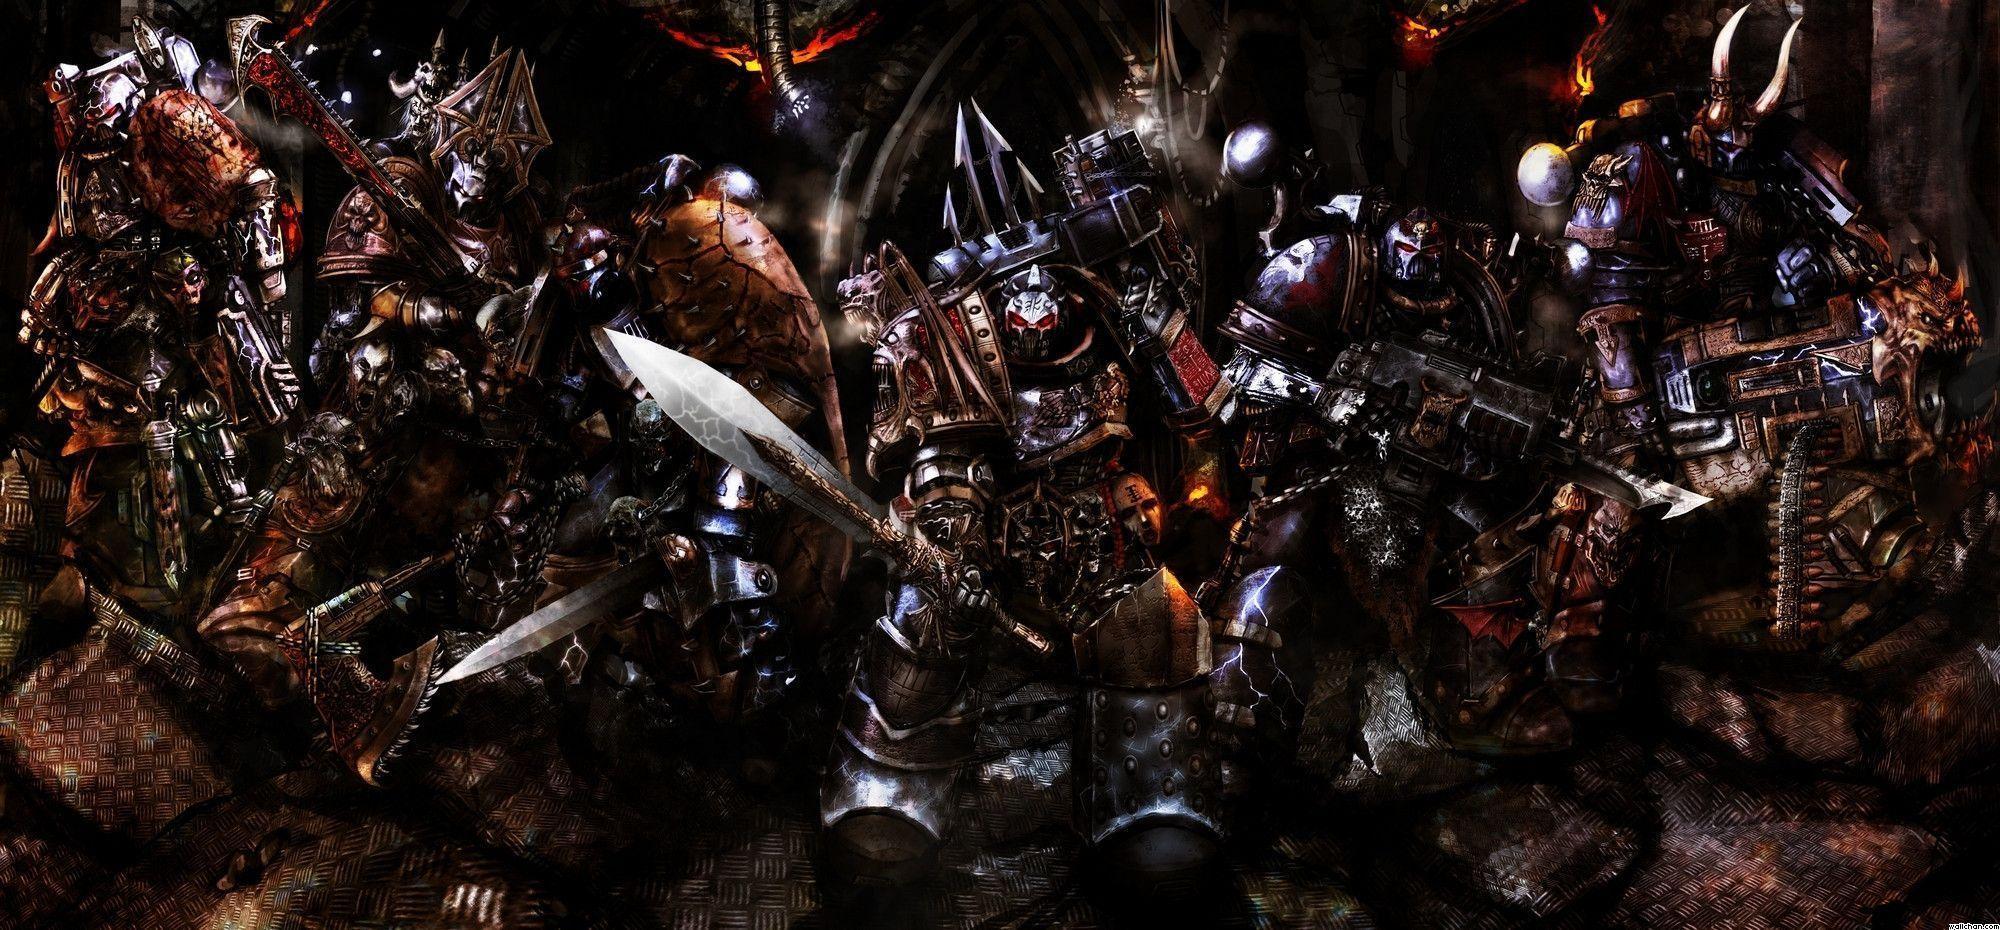 image For > Chaos Space Marines Wallpaper